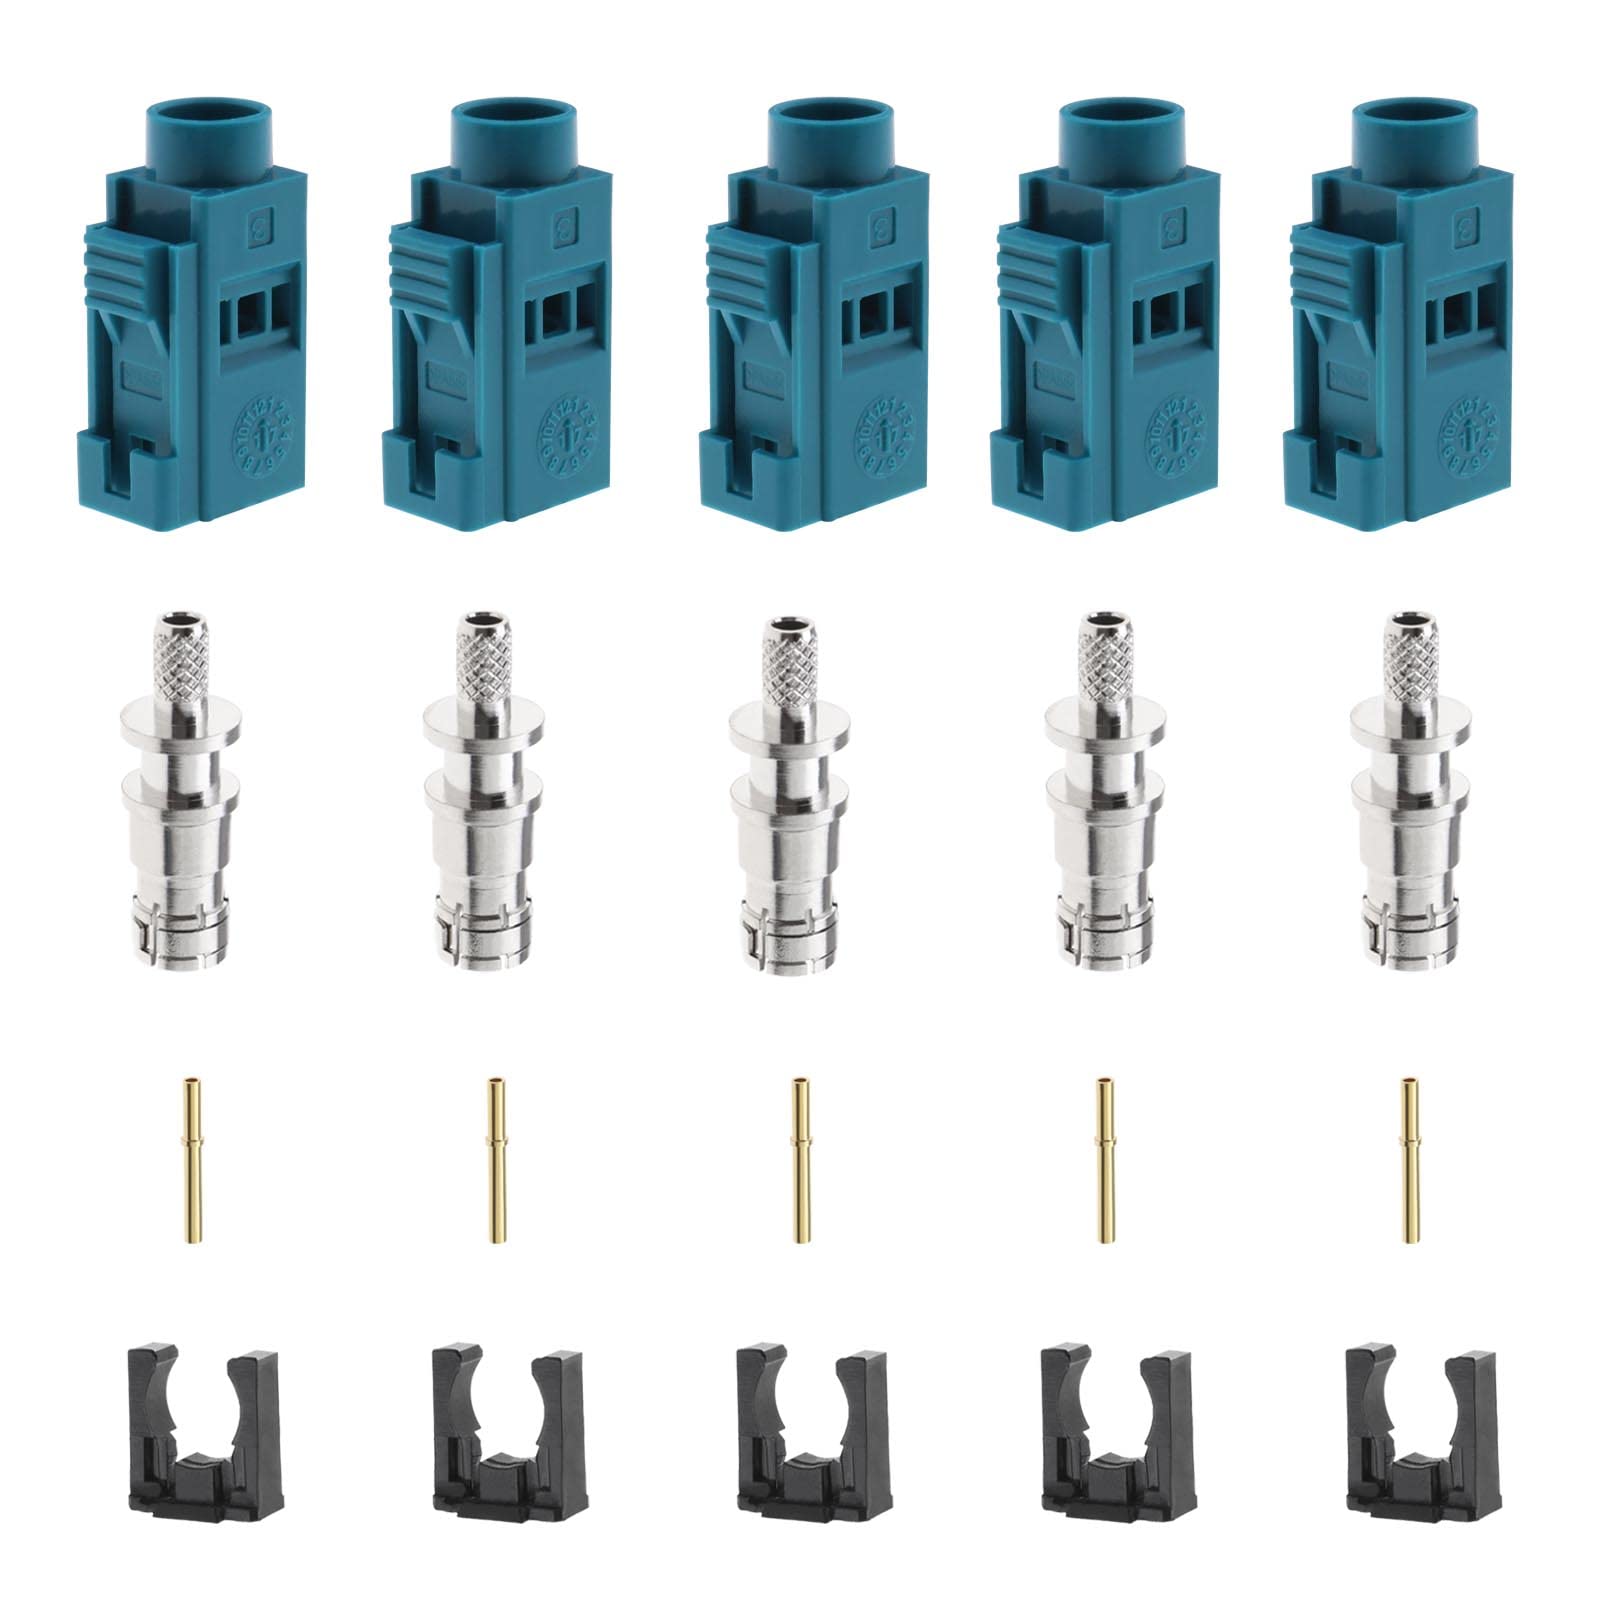 ECSiNG 5 Sets Fakra Female Antenna Connector Repair Kit for Connecting RG174/RG316 Car Cable Crimping Soldering Aerial Adapter Converter von ECSiNG